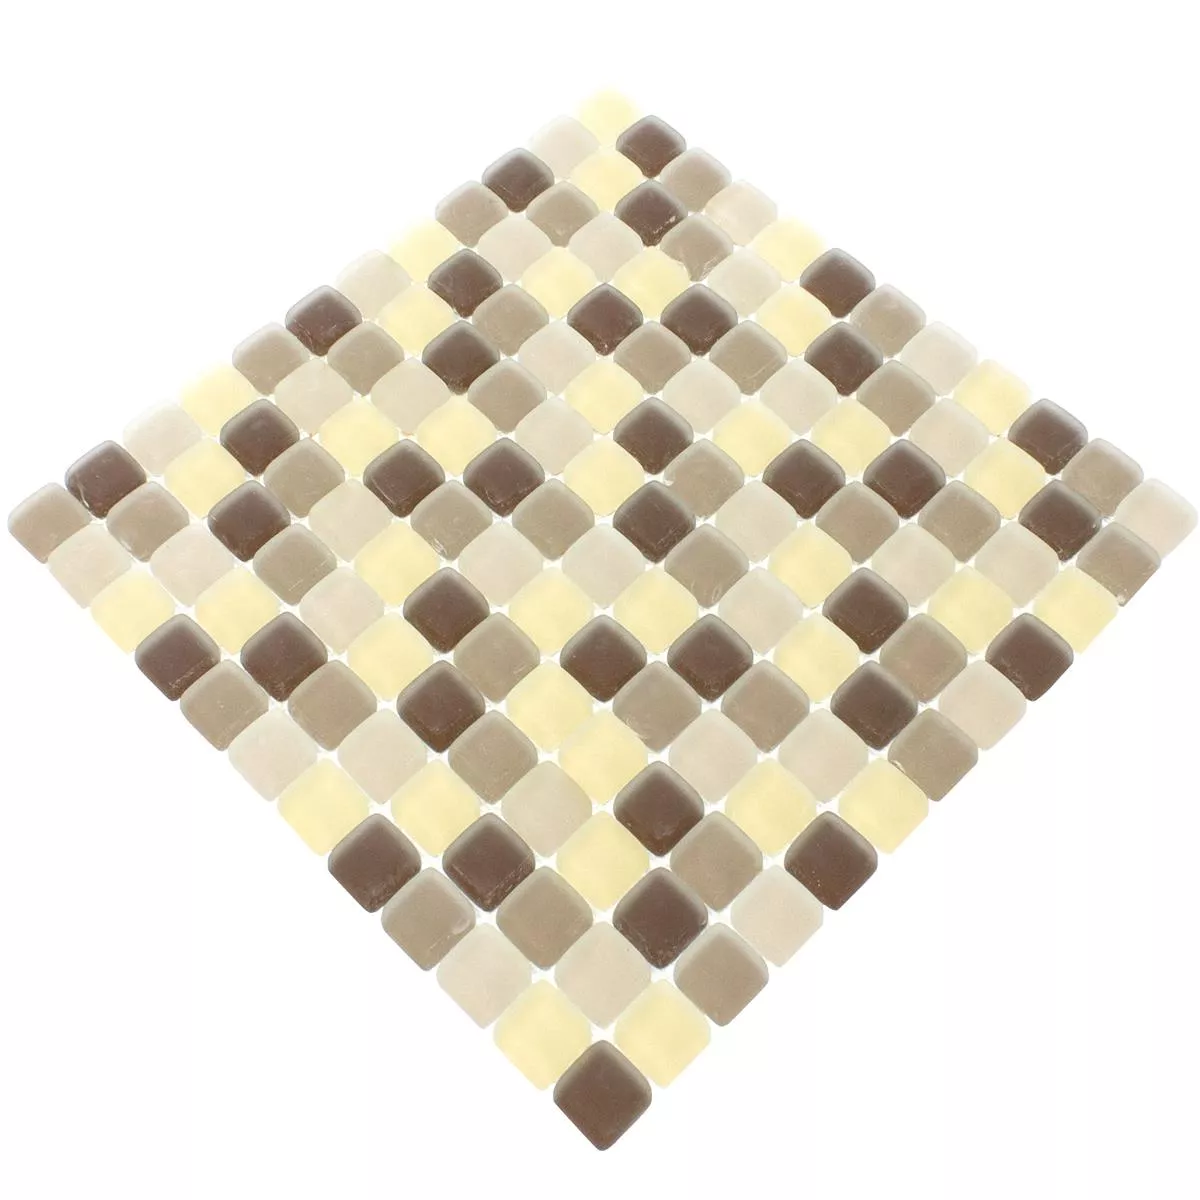 Glass Mosaic Tiles Ponterio Frosted Brown Mix